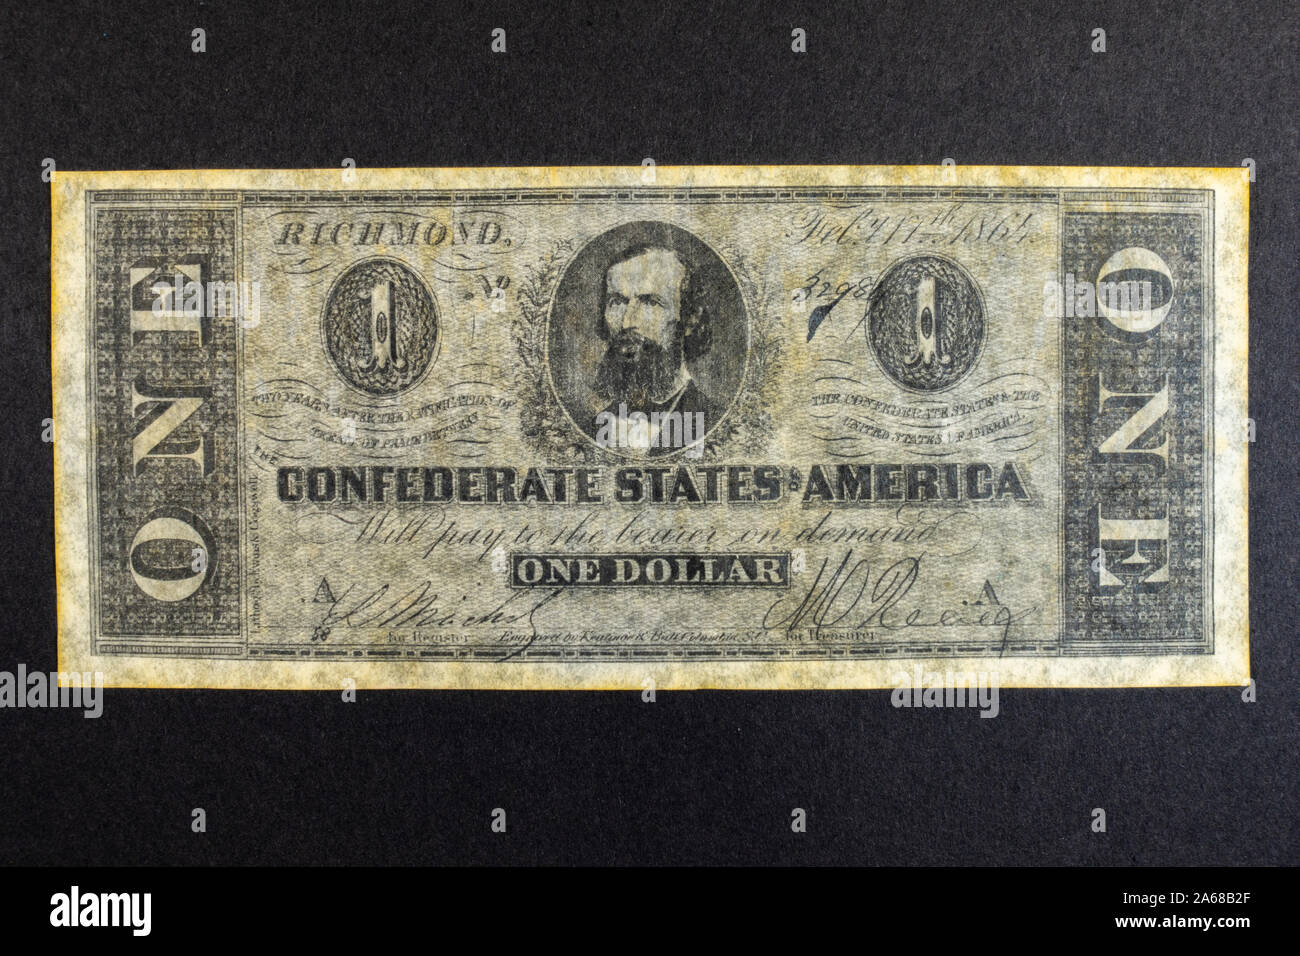 A replica 1864 one dollar ($1) bank note from the Confederate States of America (1861-65) Stock Photo